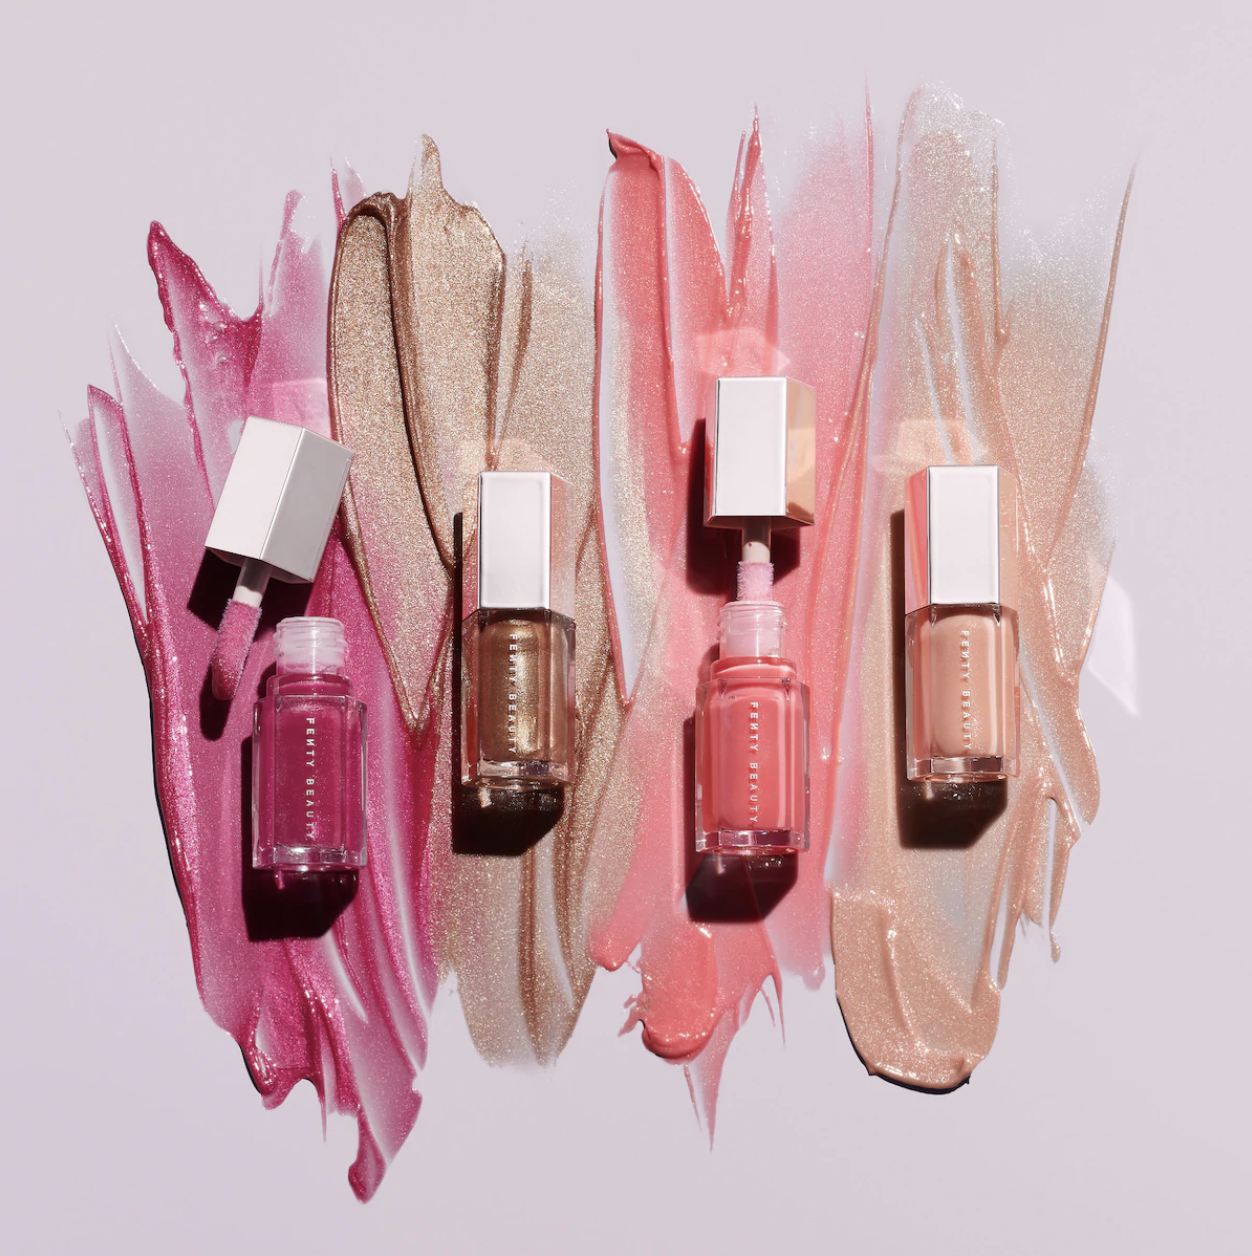 The mini lip glosses in deep pink, brown, light pink, and a peachy nude